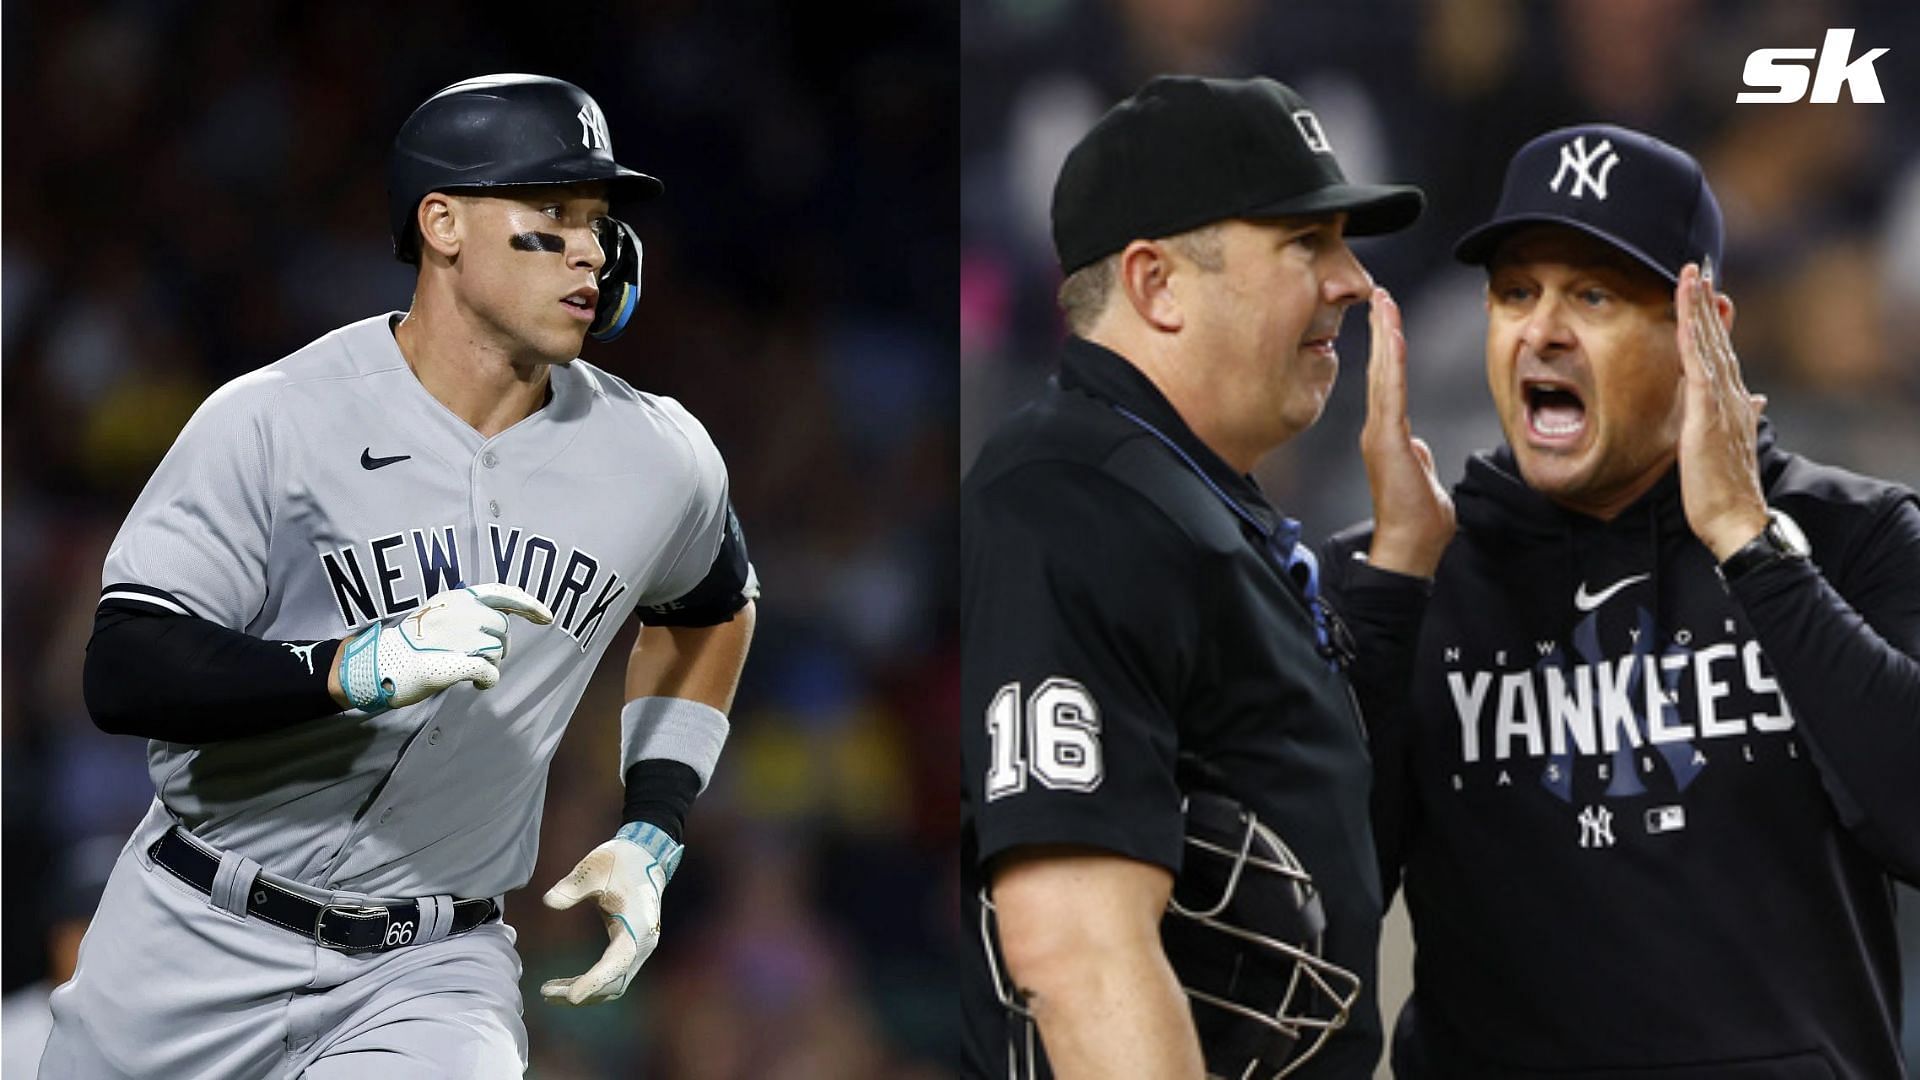 Judge's 2 HRs help Germán win after suspension, Yankees top